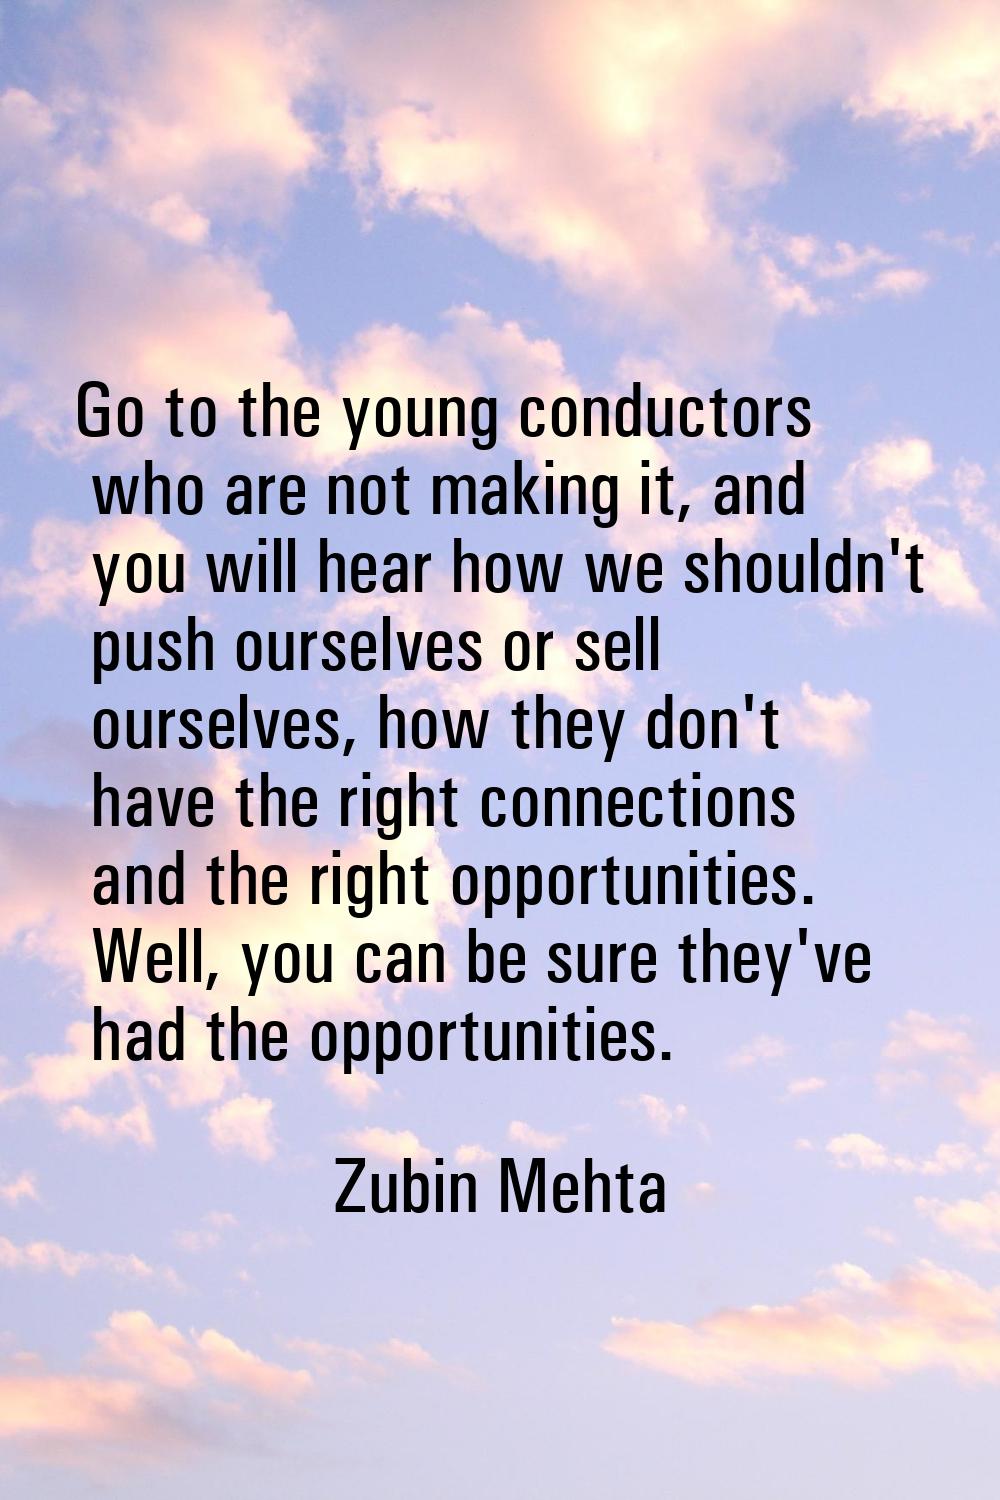 Go to the young conductors who are not making it, and you will hear how we shouldn't push ourselves